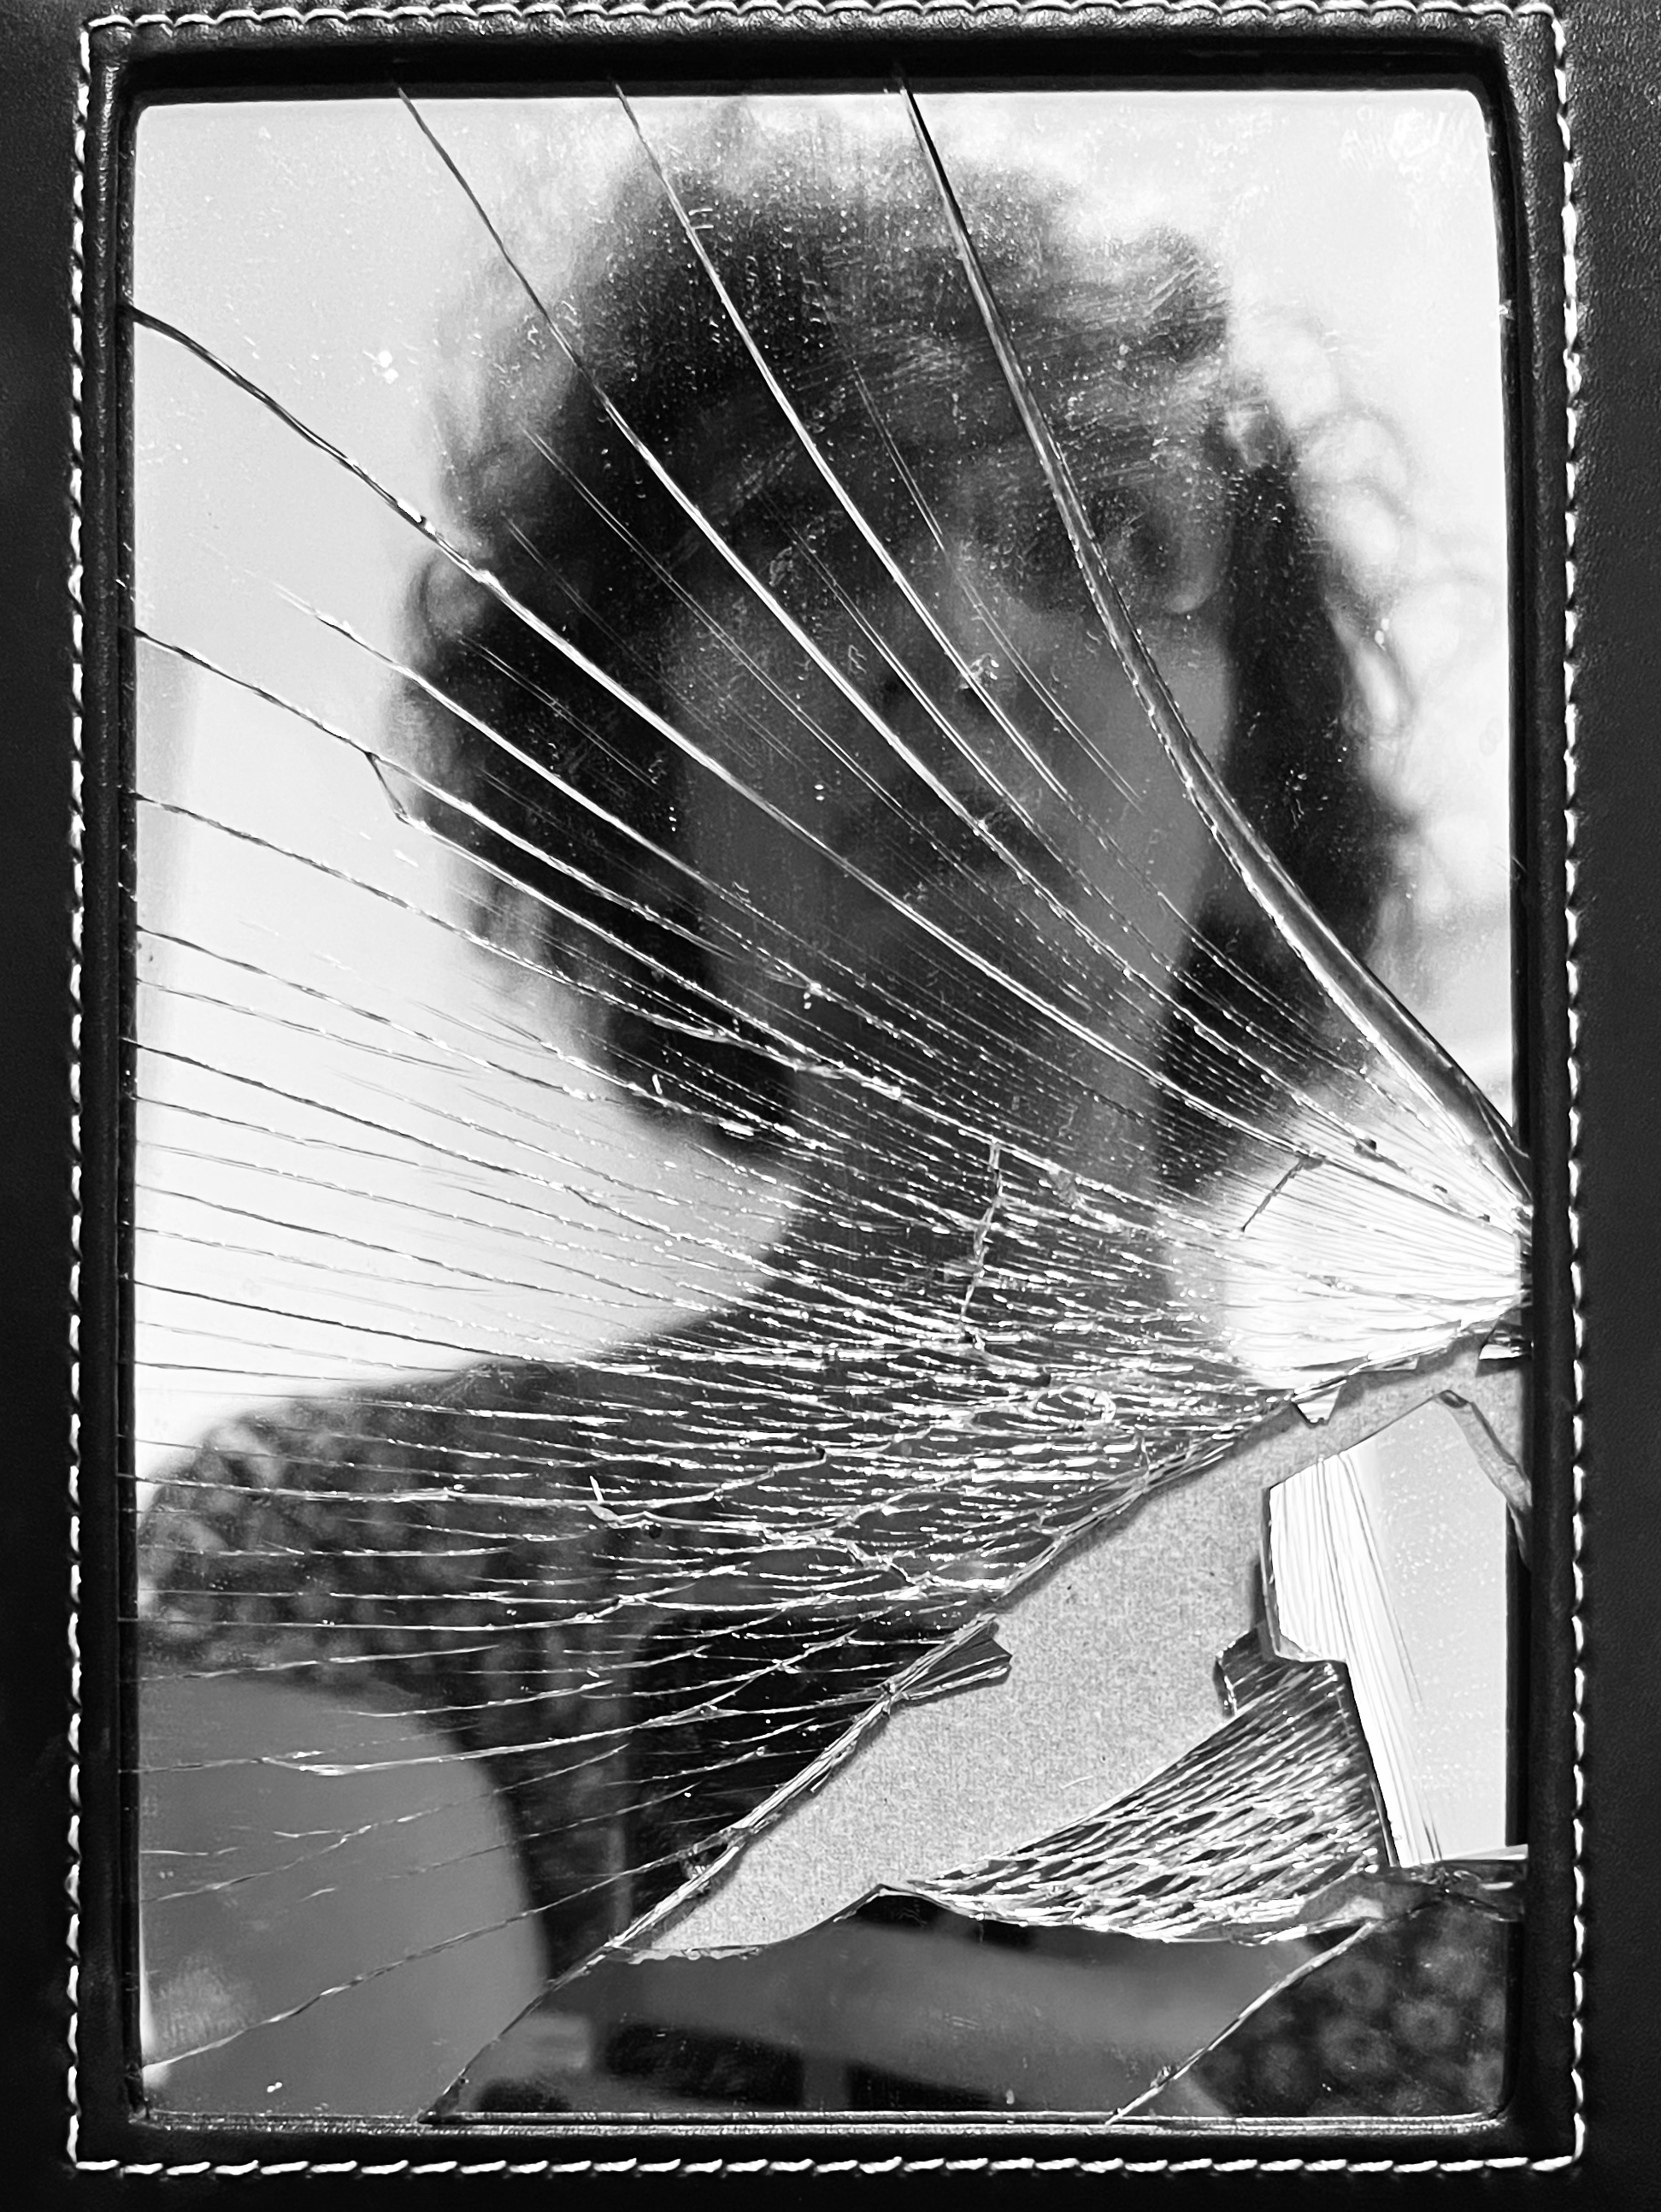 A picture of me reflected in a small mirror. The glass is cracked. I'm looking up. The image is in black and white